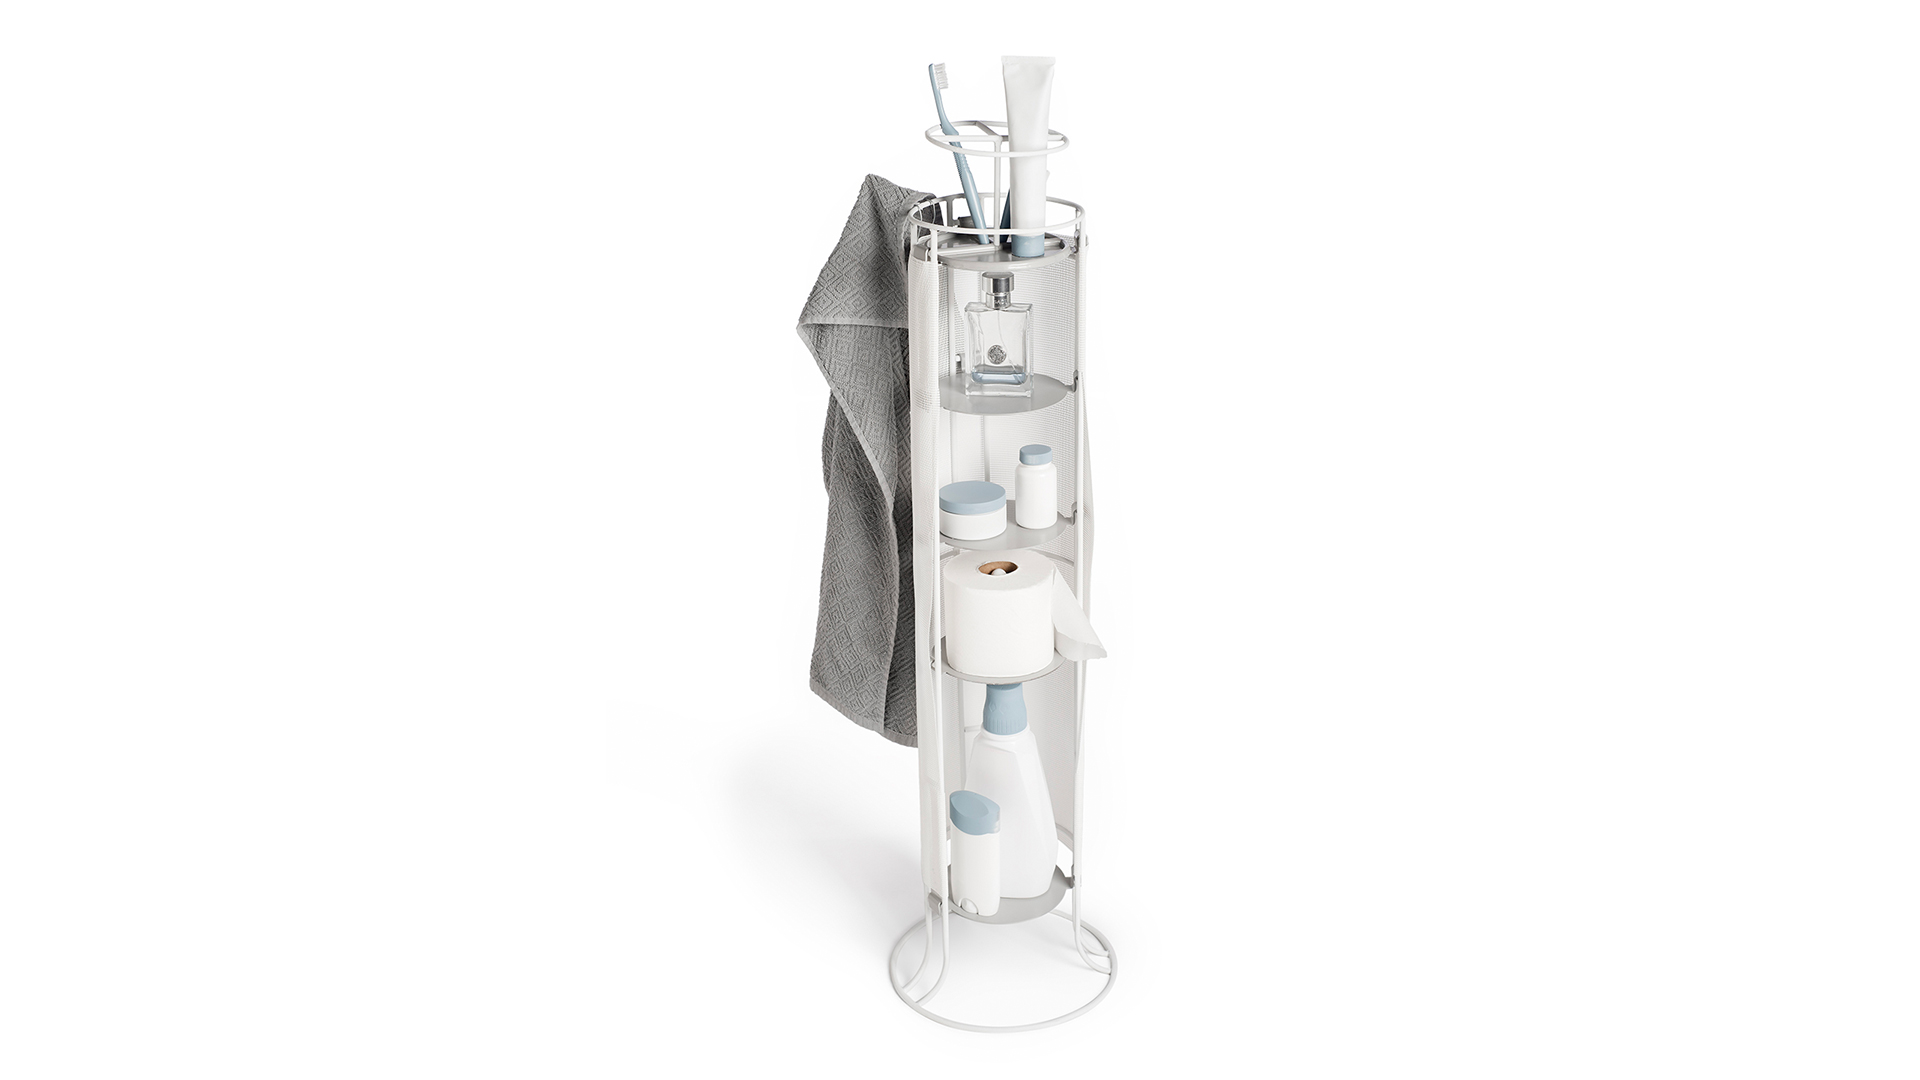 Tall white cylindrical tower with five accessible shelves with various bathroom supplies and towel hanging from side hook